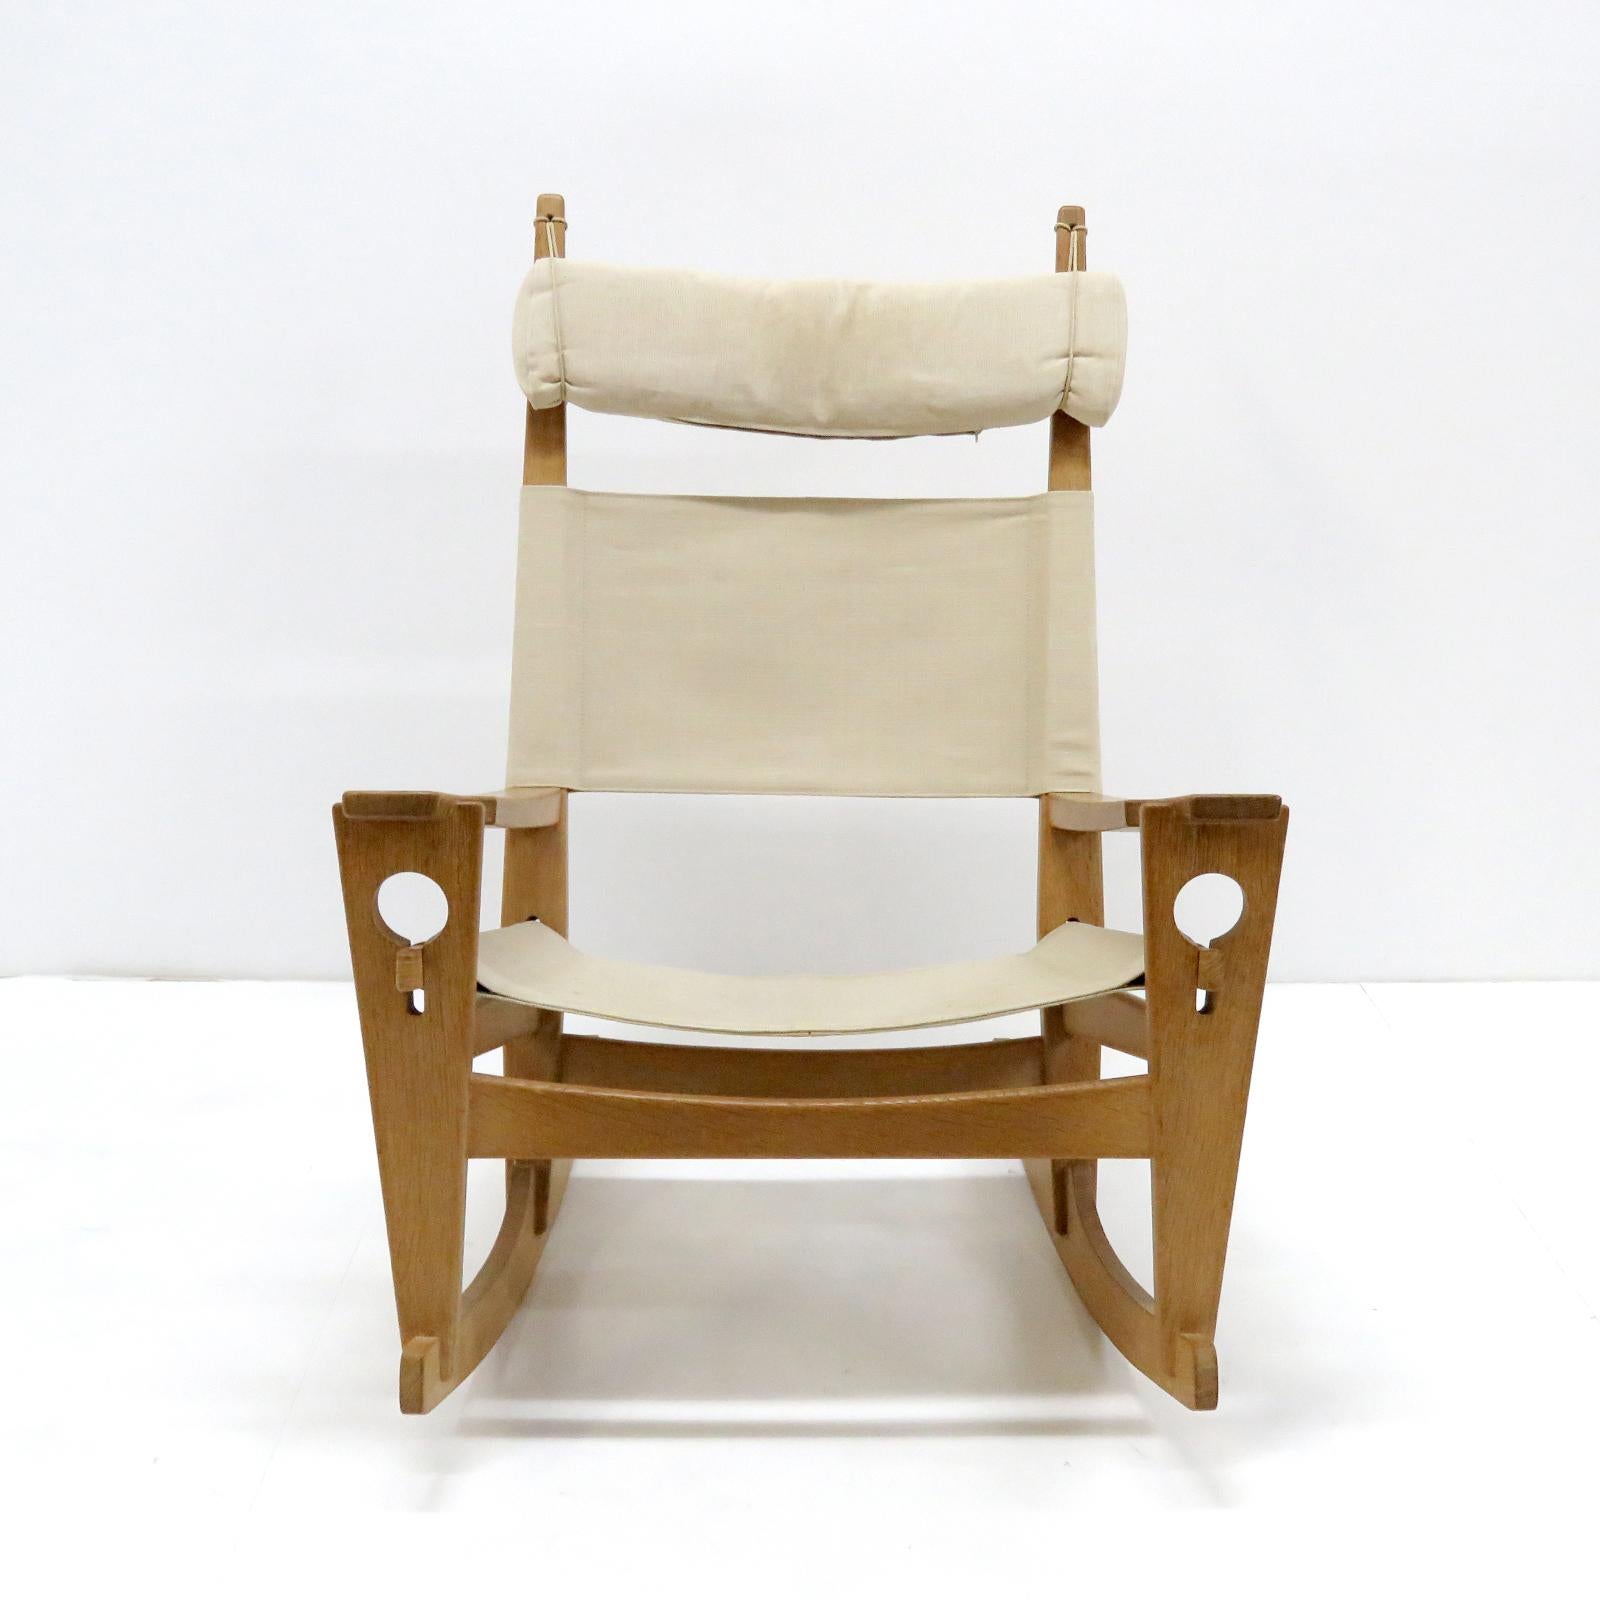 Wonderful rocking chair 'Keyhole' model GE-673, by Hans Wegner for GETAMA, designed in 1967, oak frame with natural linen of later date and original head rest, all wood joints without metal hardware featuring the unique keyhole-shaped joinery that